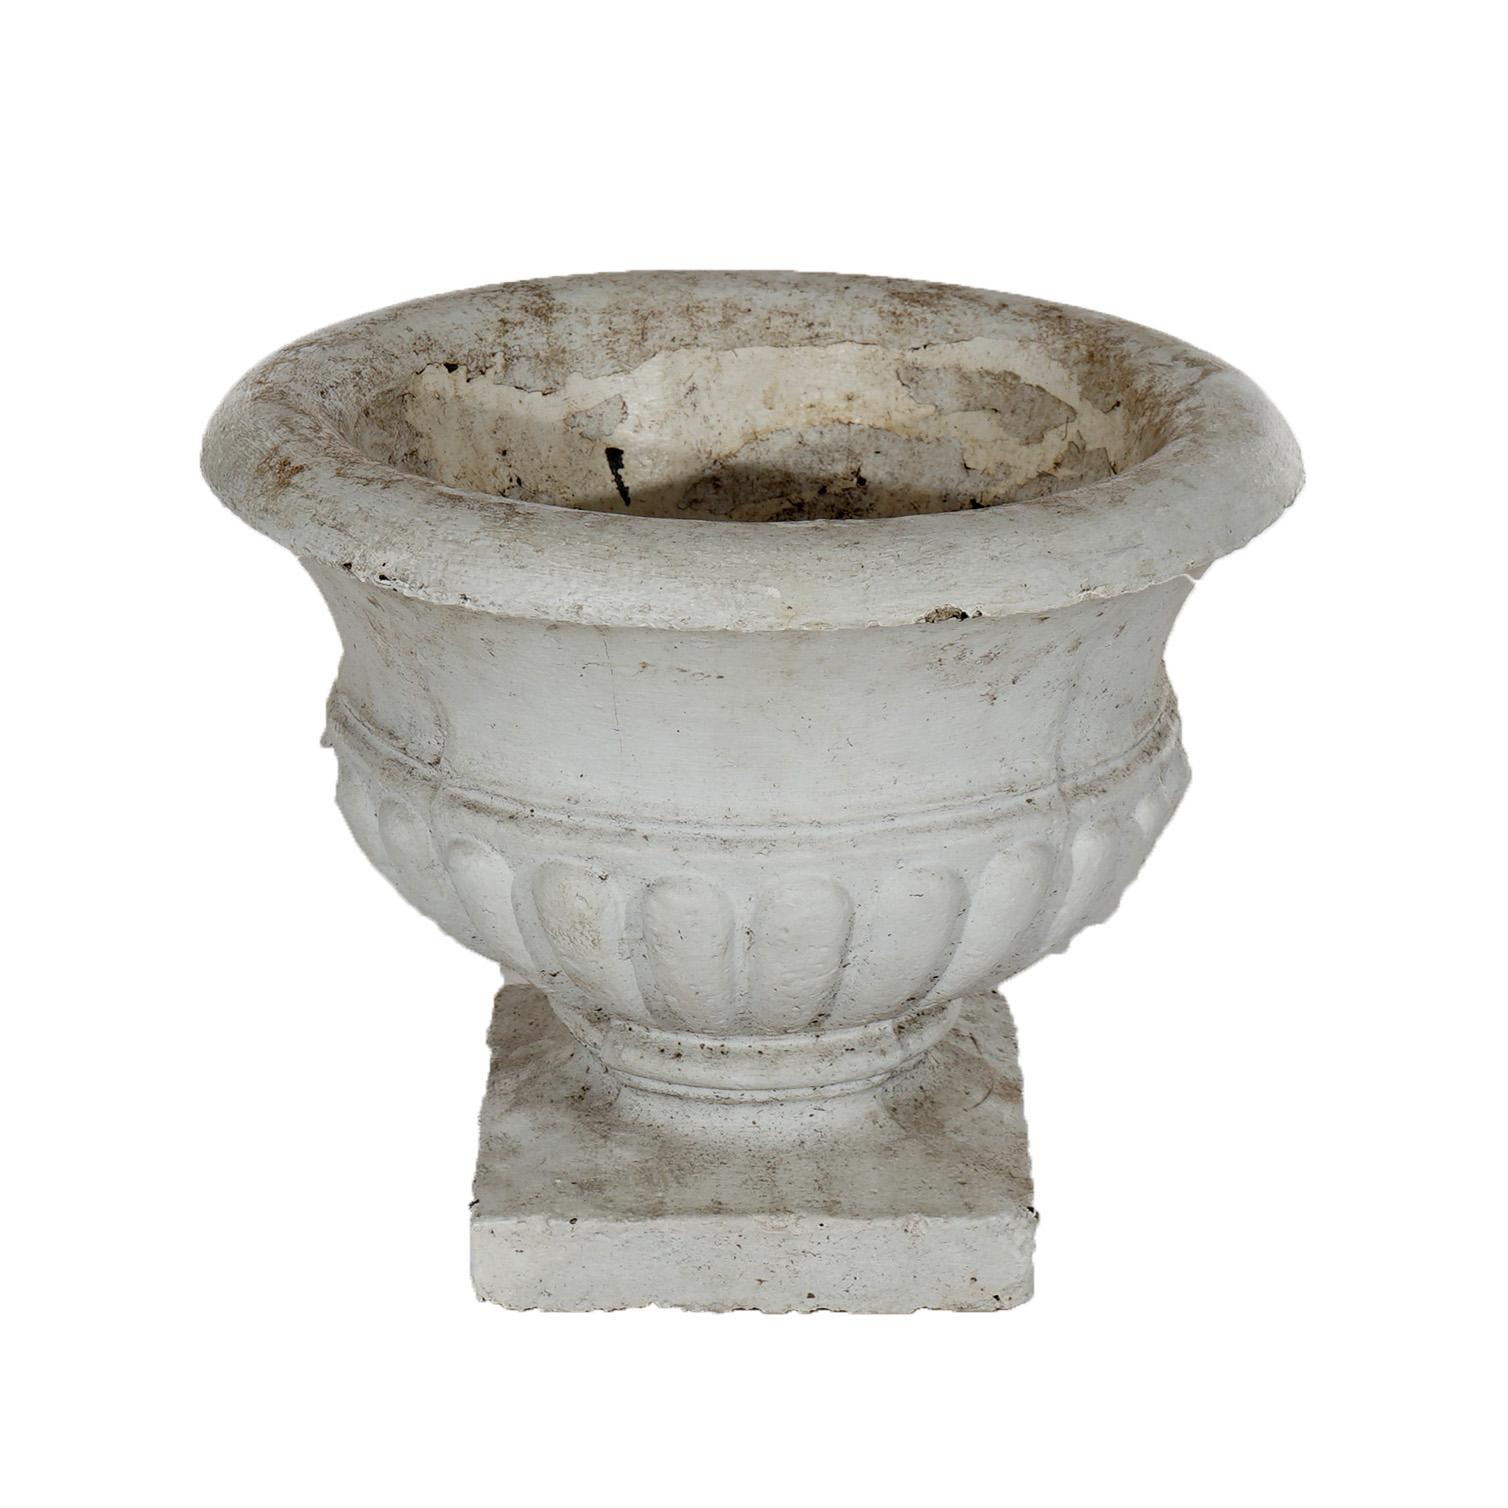 ***Ask About Reduced In-House Shipping Rates - Reliable Service & Fully Insured***
Classical Painted Cast Hardstone Mellon Bowl Garden Urn 20th C

Measures- 12''H x 14.5''W x 14.5''D